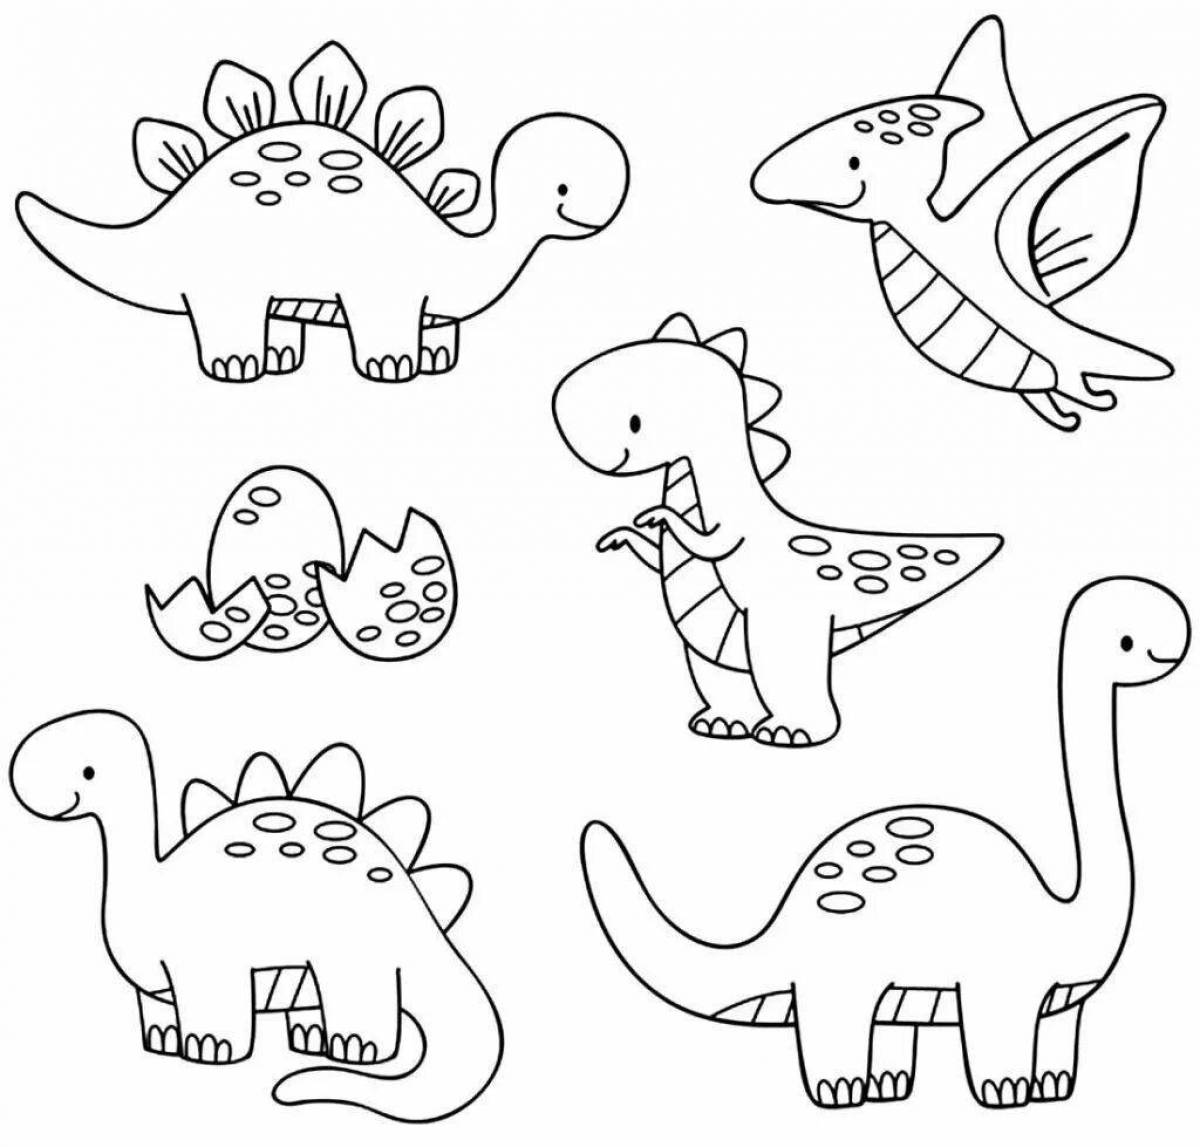 Cute and colorful dinosaur coloring book